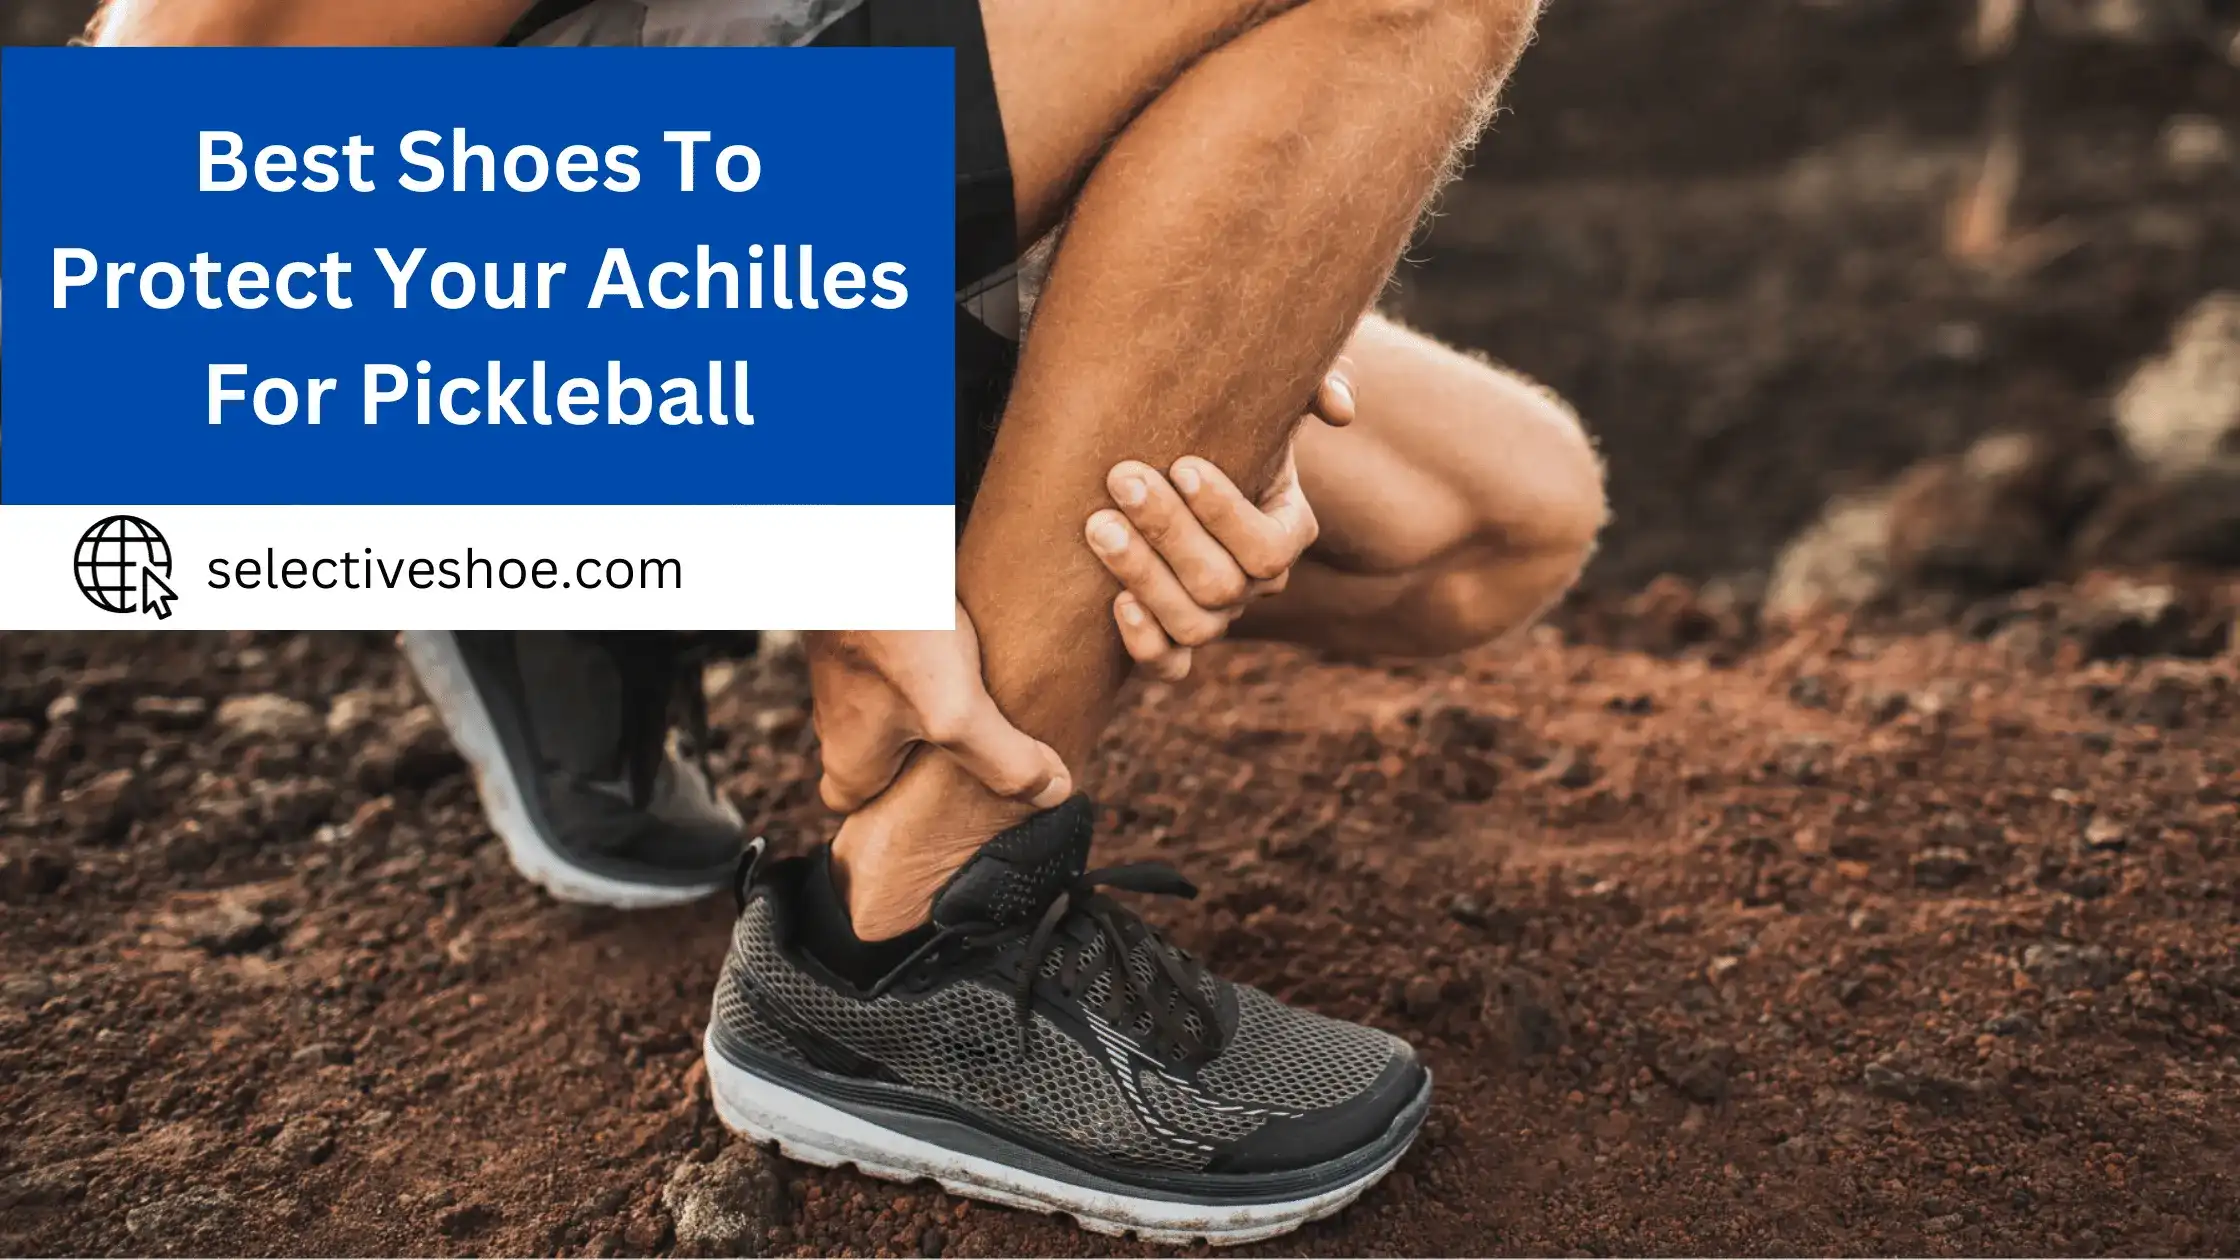 Best Shoes To Protect Your Achilles For Pickleball - Latest Guide